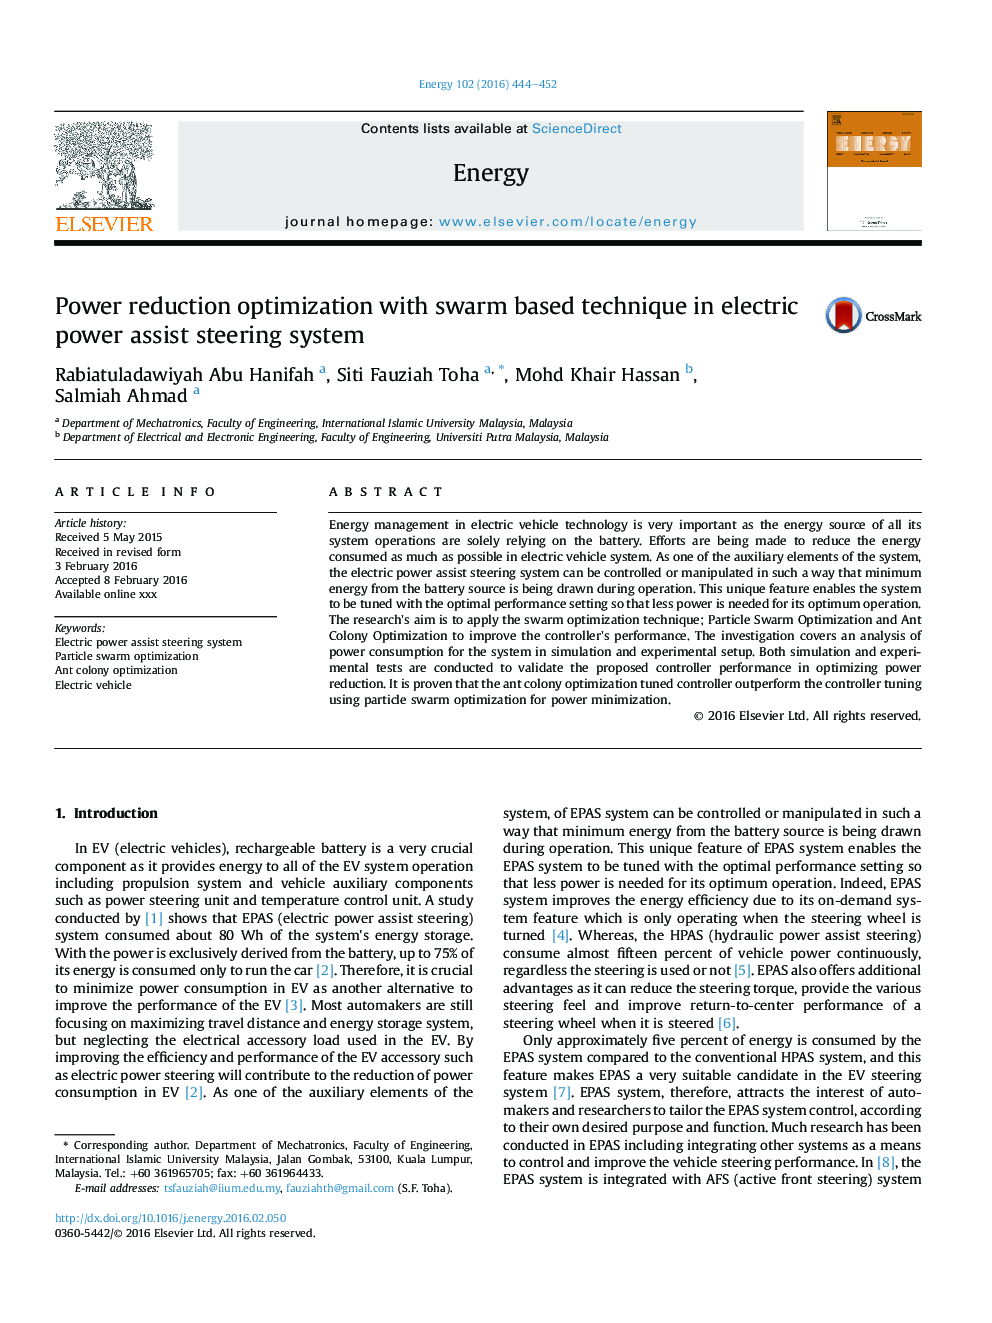 Power reduction optimization with swarm based technique in electric power assist steering system